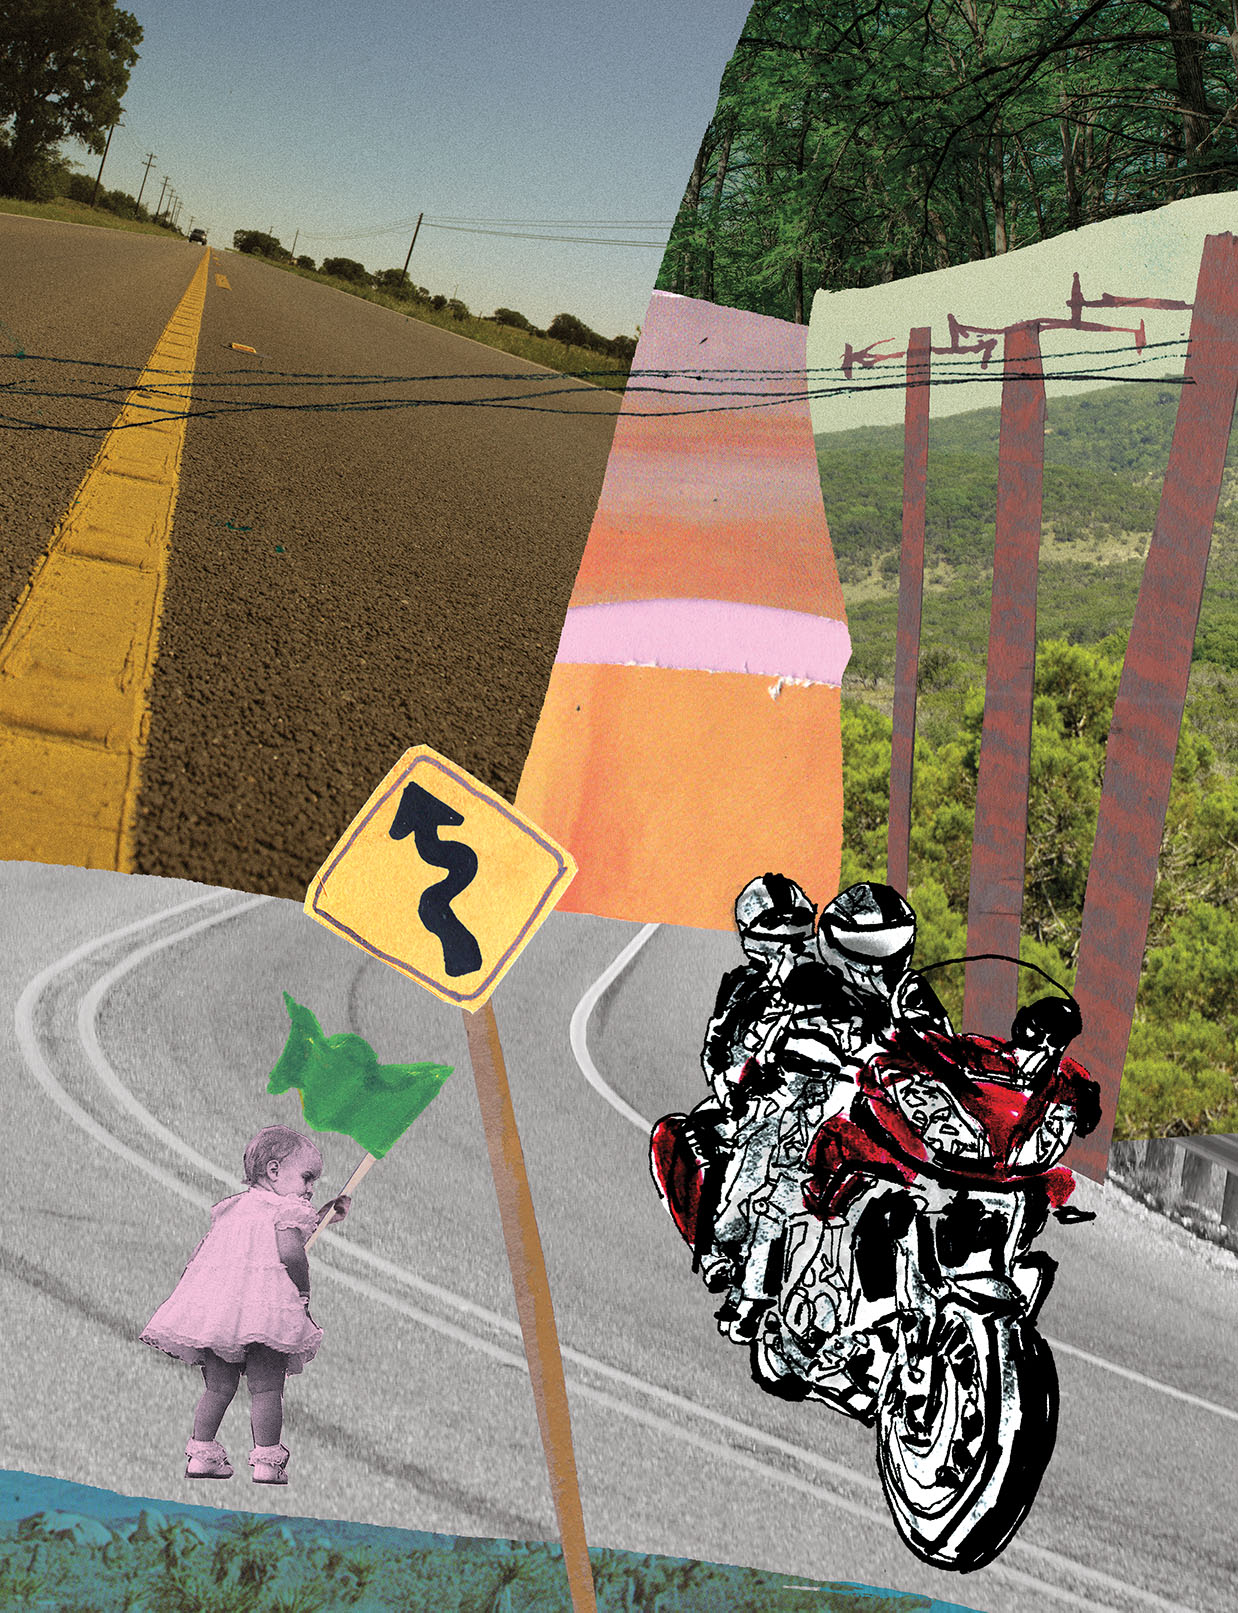 An illustration about reclaiming her freedom with a motorcycle ride.